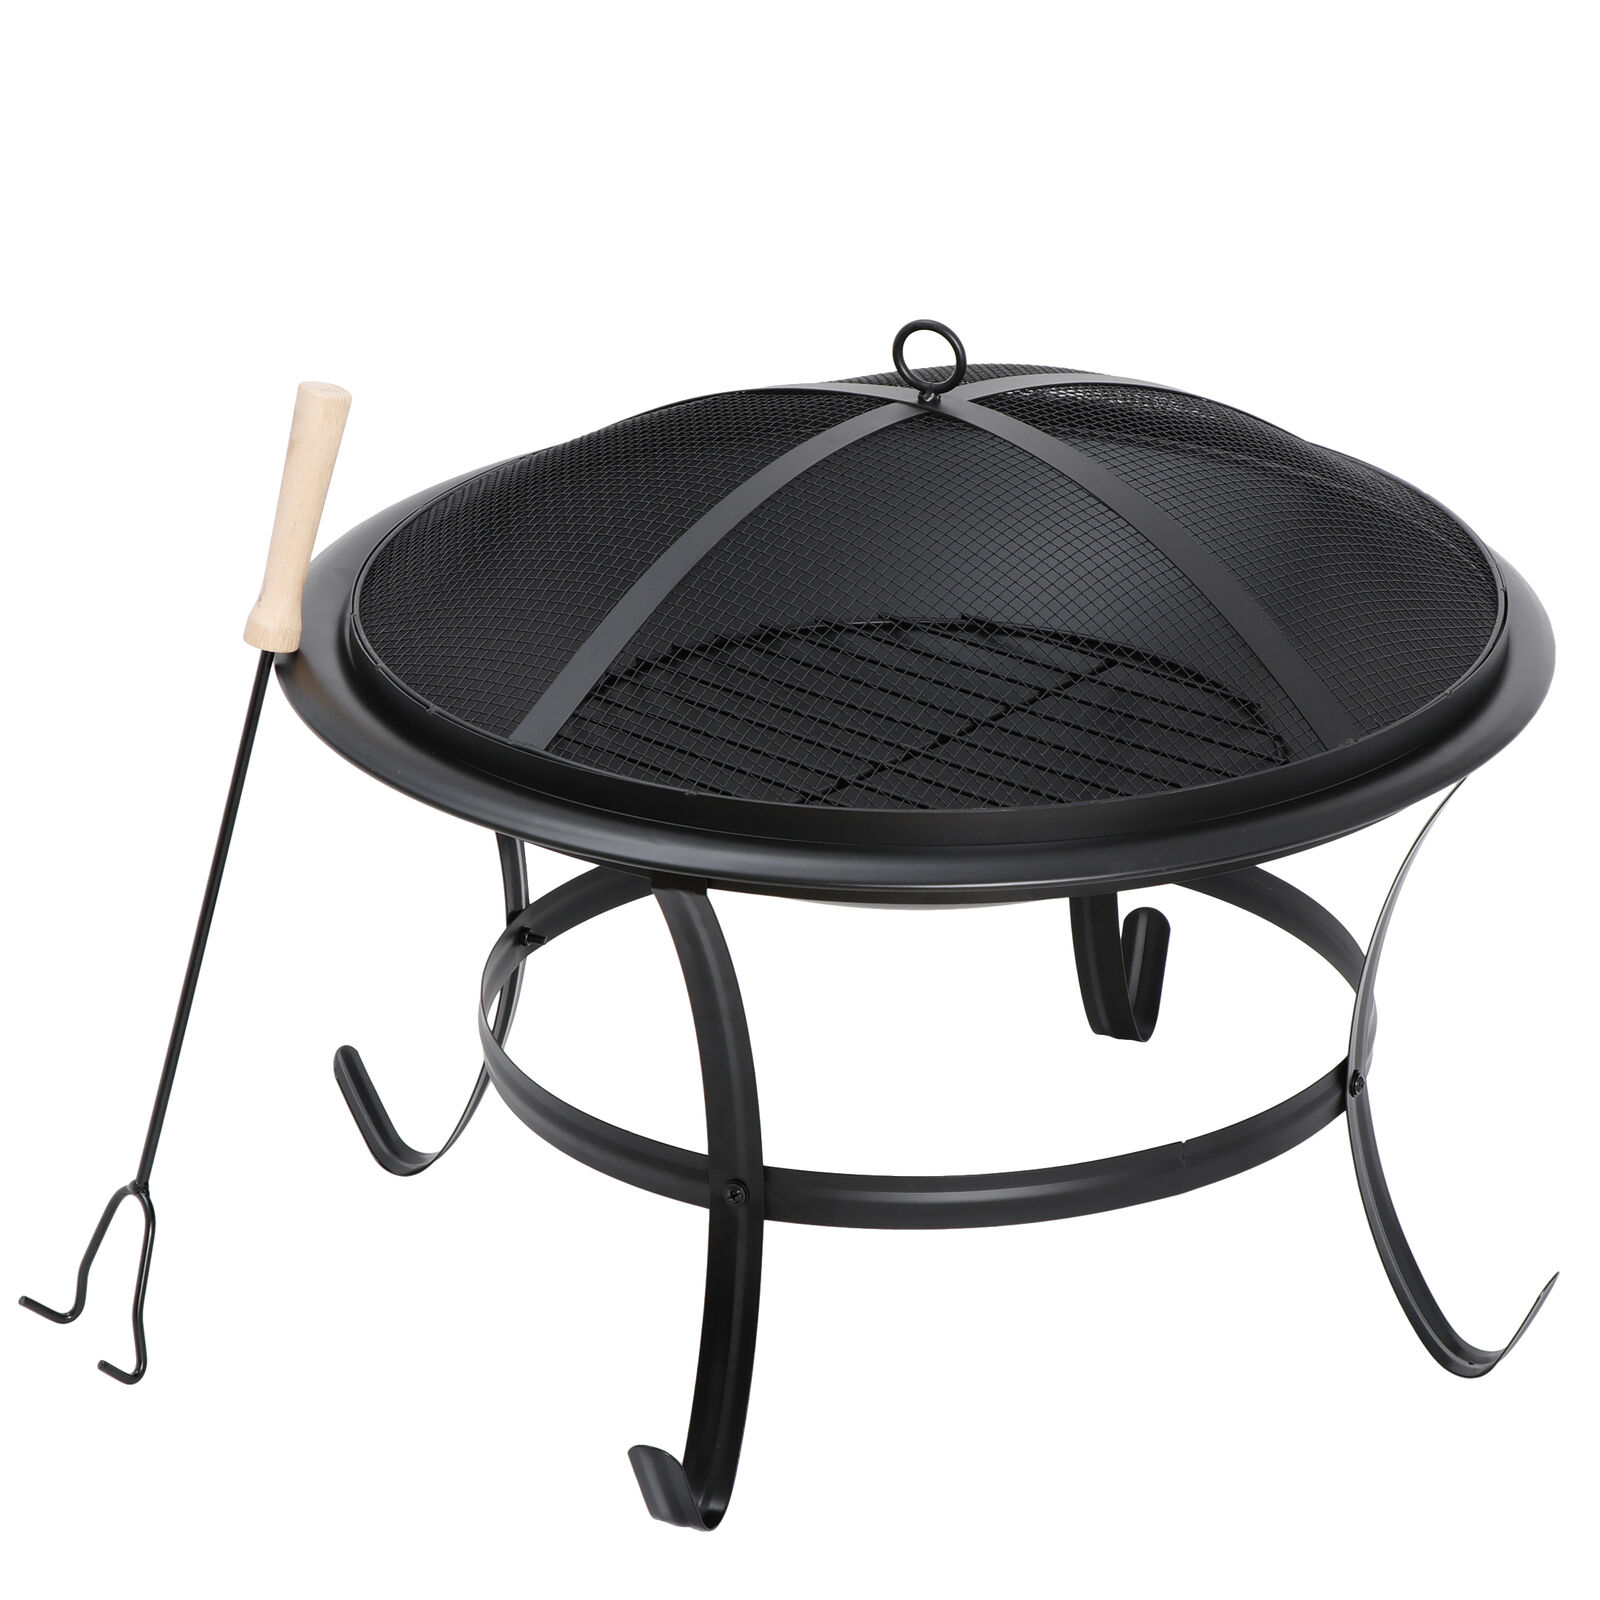 22'' Outdoor Patio Steel Fire Pit Bowl BBQ Grill with Mesh Spark Screen Cover